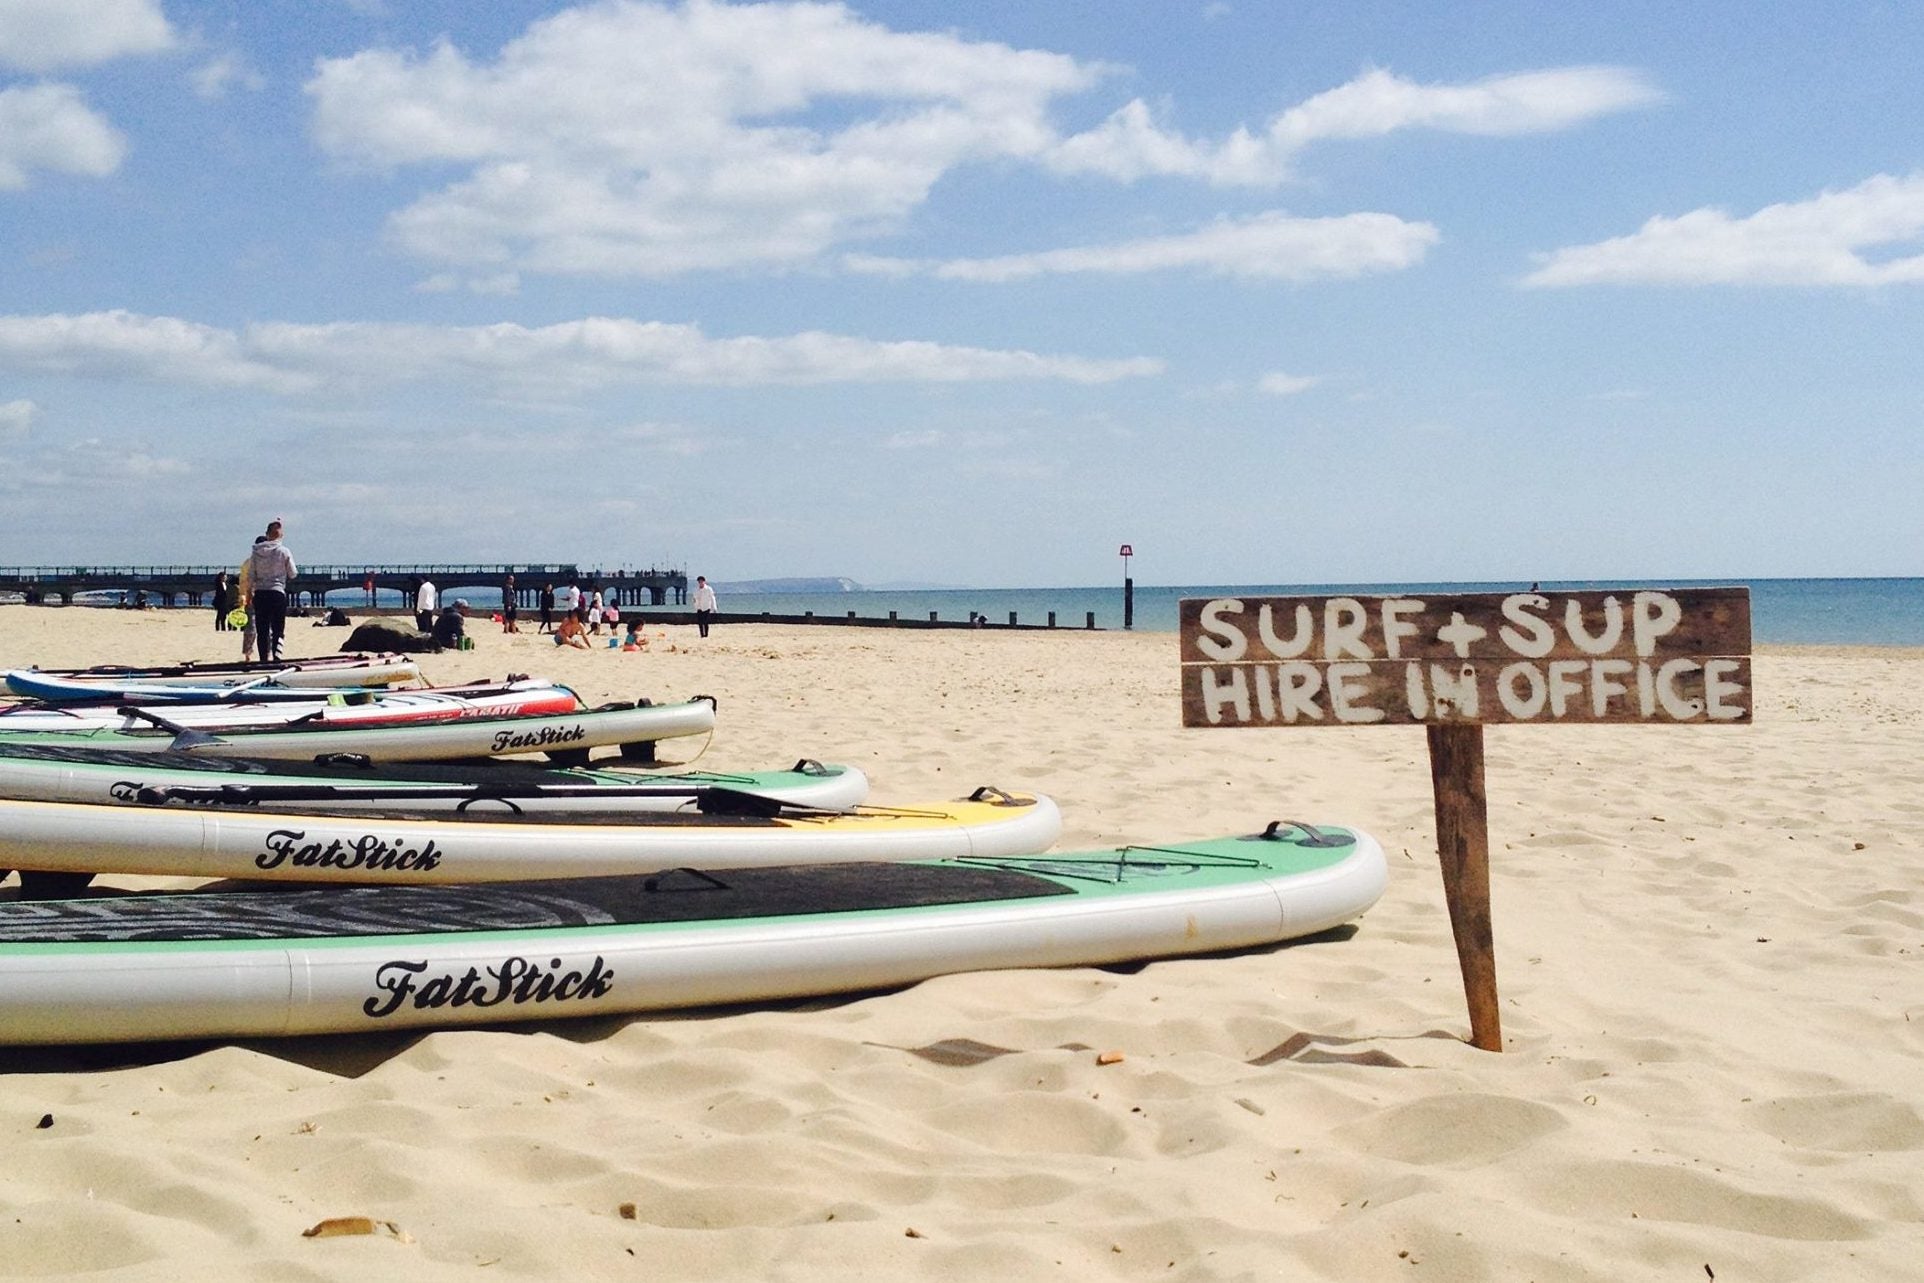 Hire a board at Surf Steps